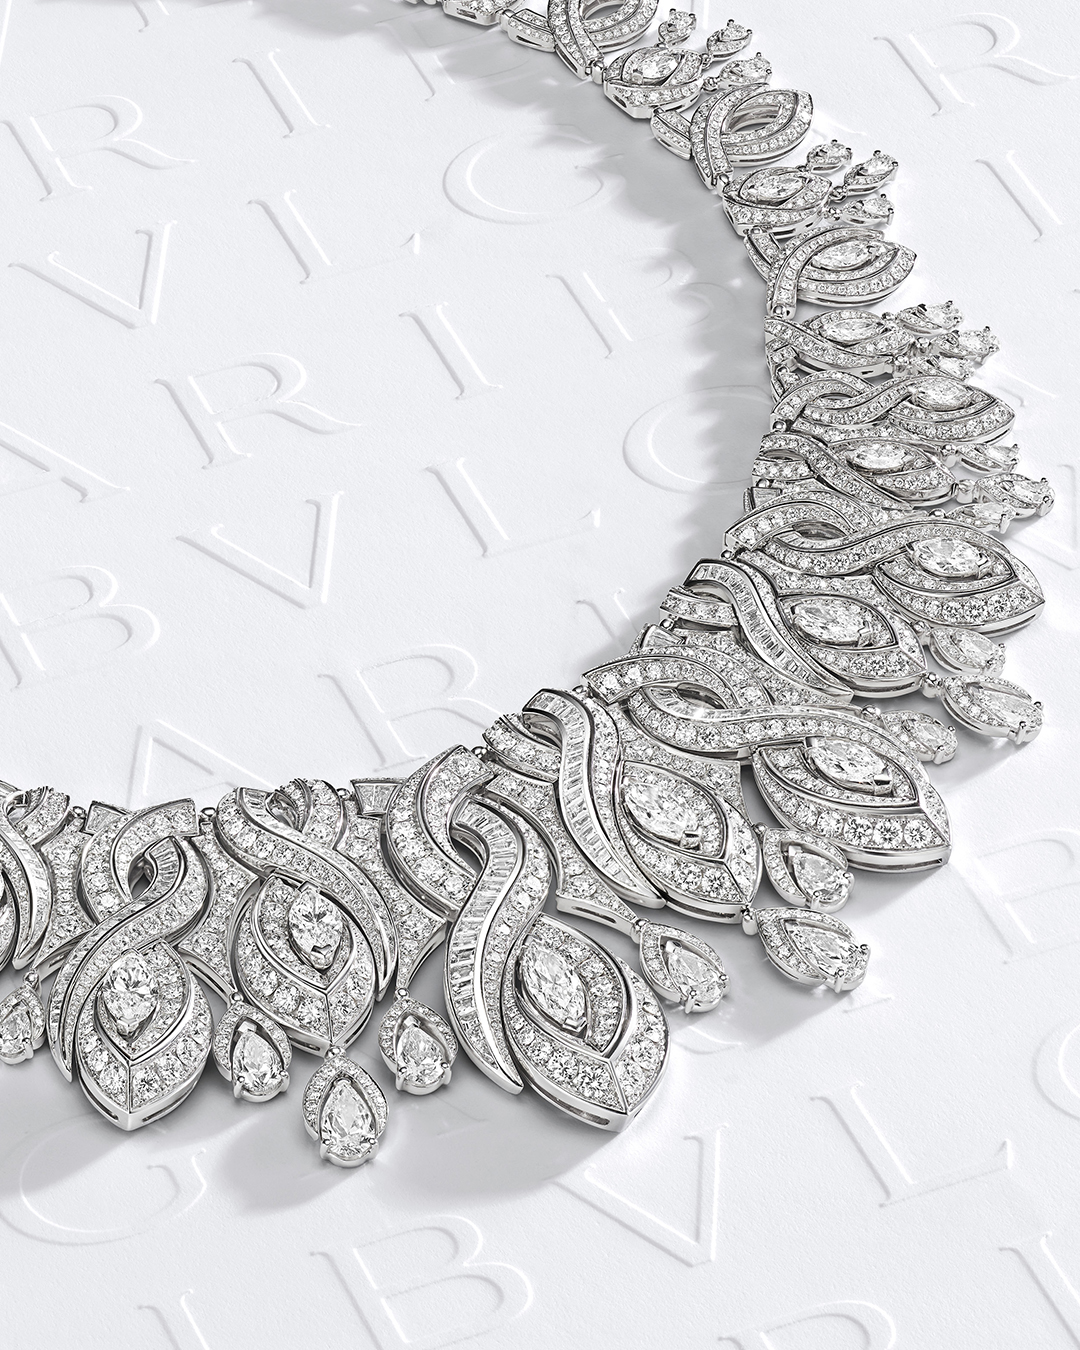 Bulgari - An opulent masterpiece. This Serpenti High Jewelry necklace  demonstrates the Maison's mastery of gemstones. Bulgari turns wonders of  nature into this eternal work of art, expertly setting 37 pear cut